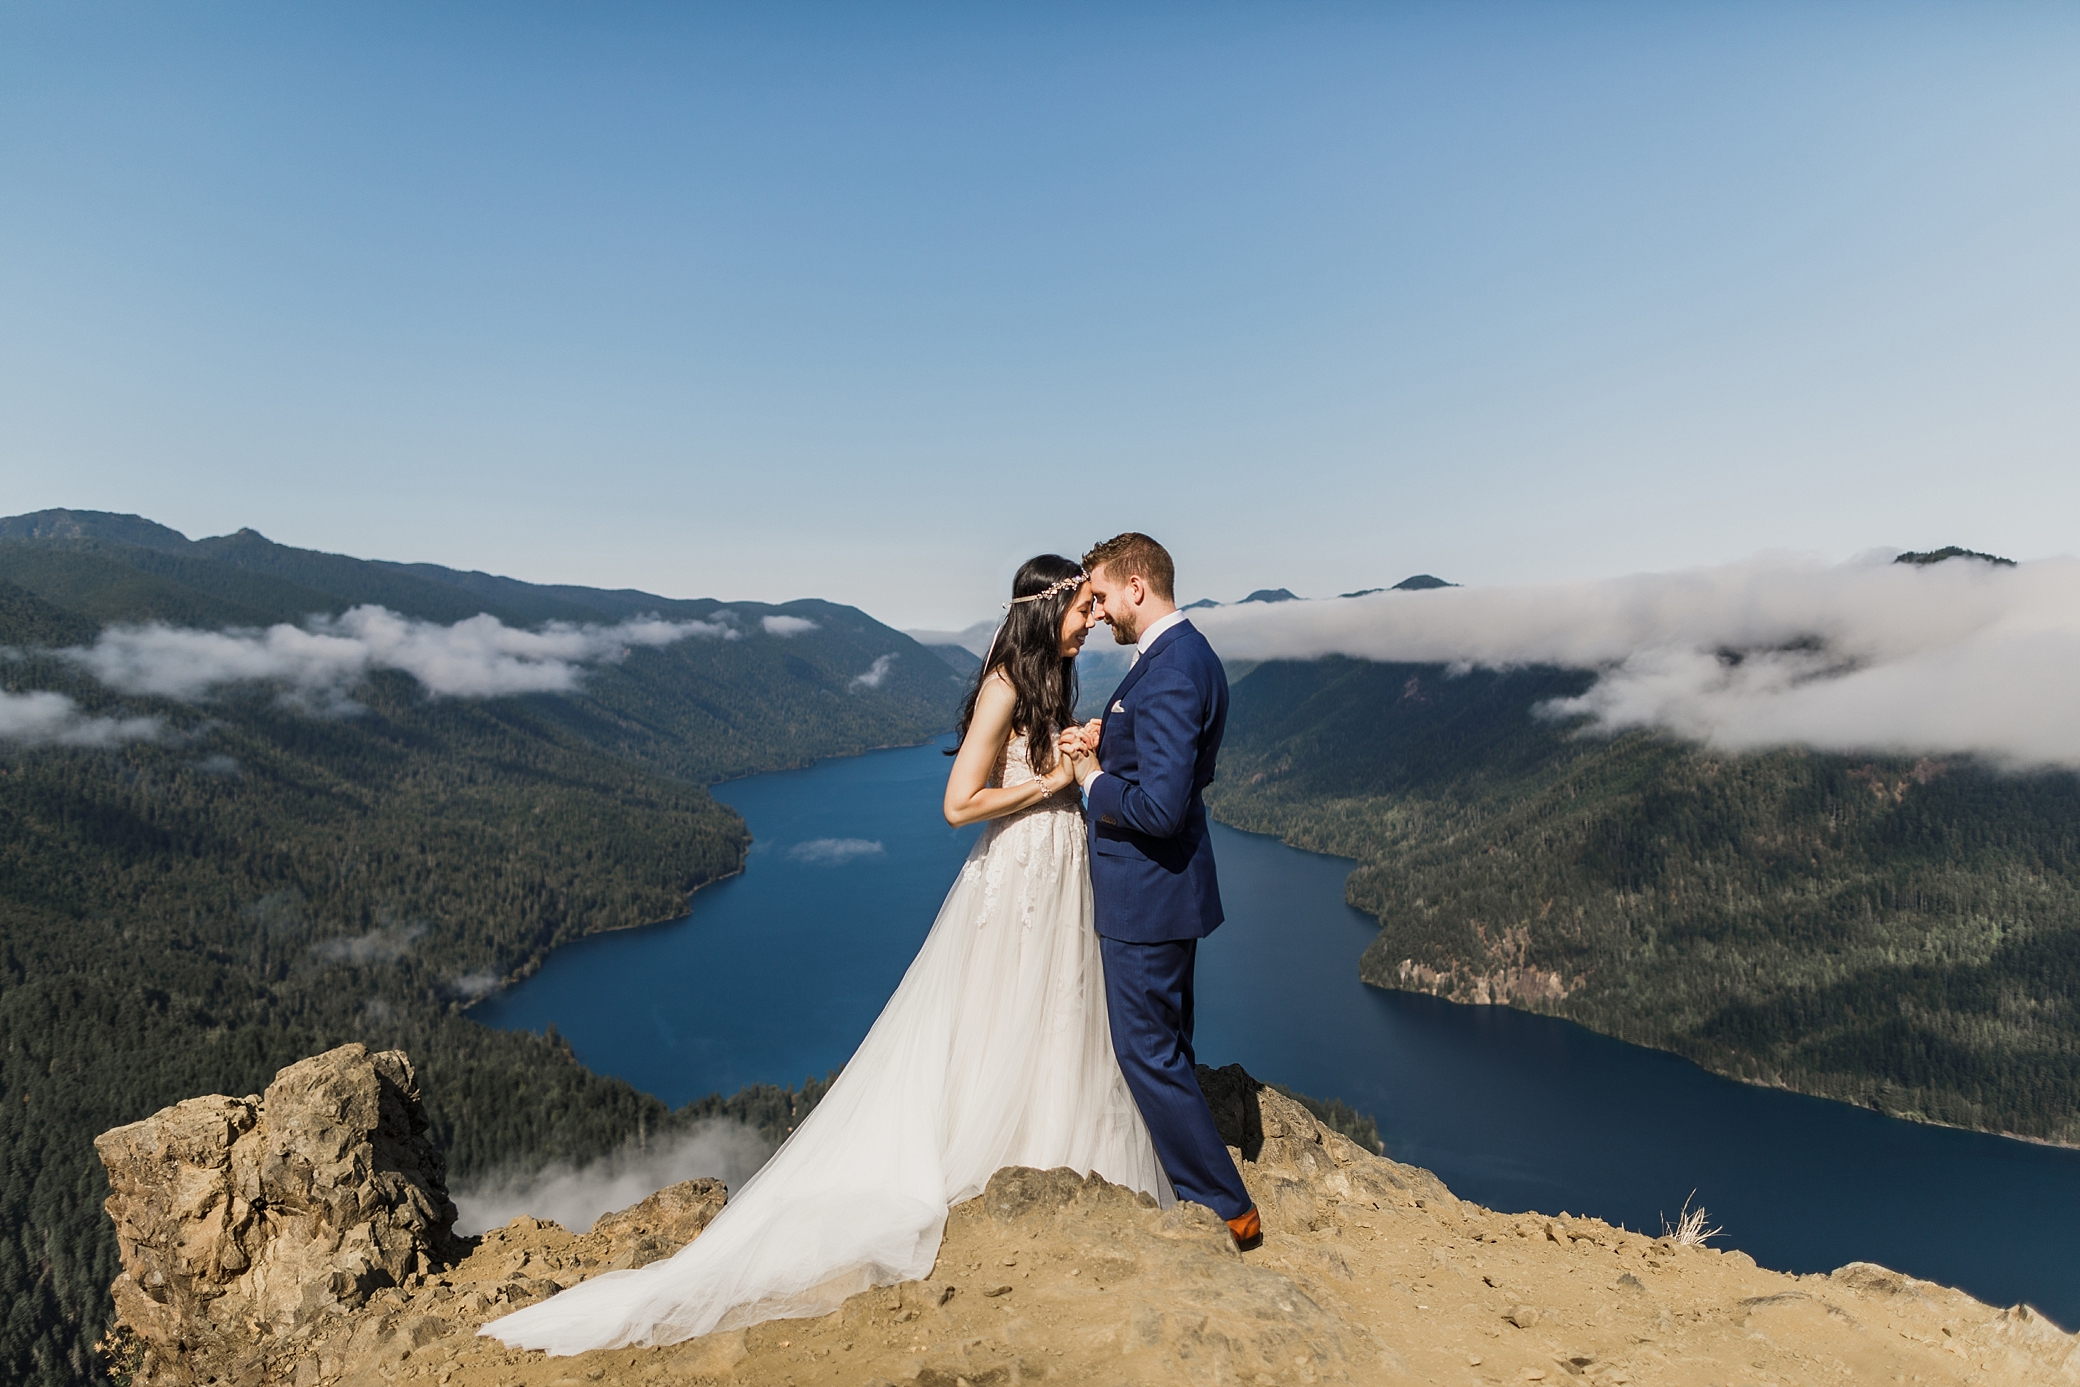 Intimate elopement ceremony overlooking Lake Crescent in the Olympic National Park | Megan Montalvo Photography